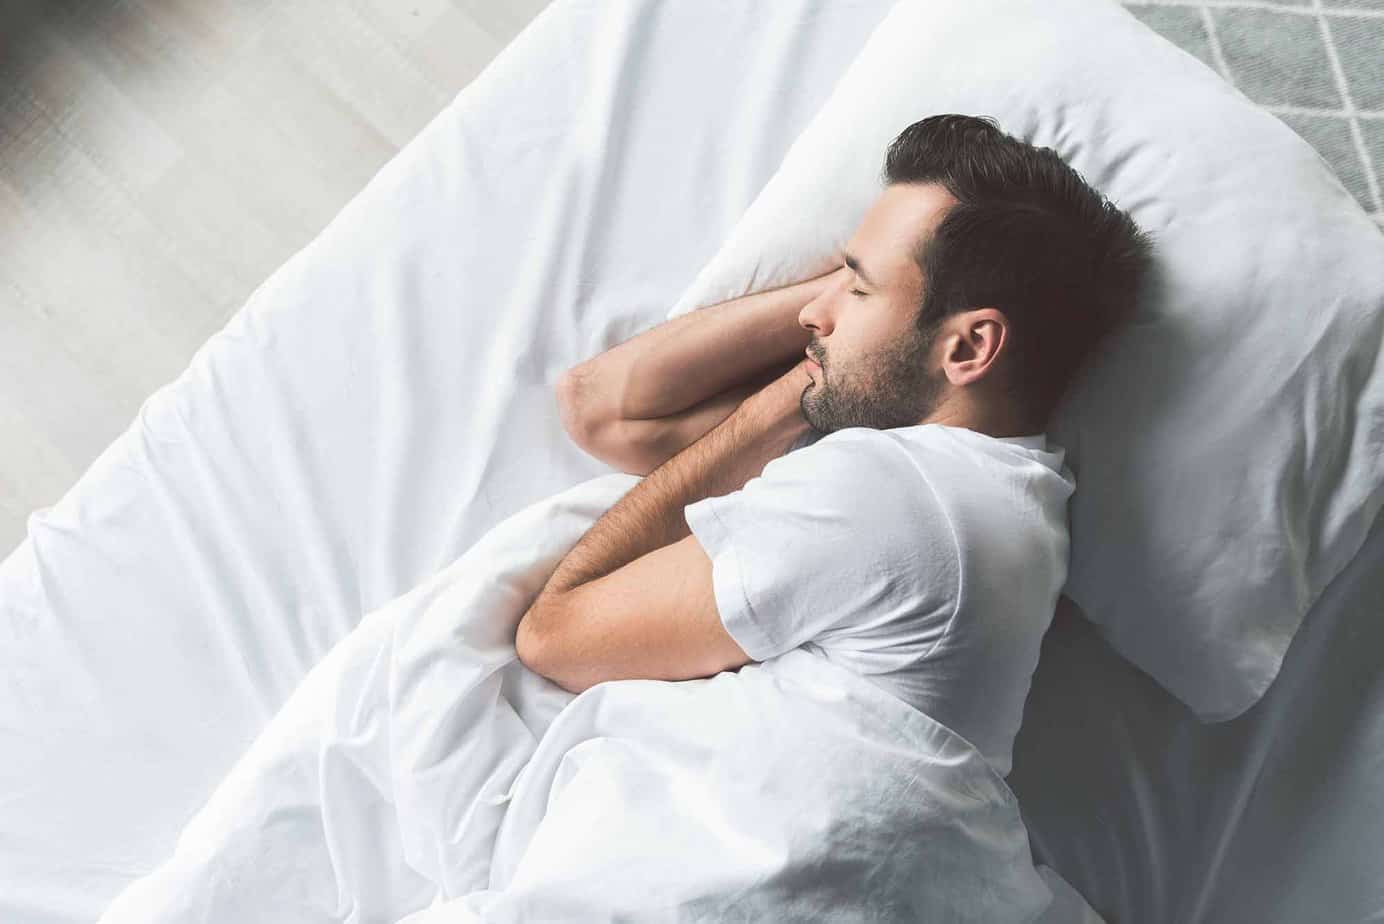 How Important Is Sleep for Your Recovery?